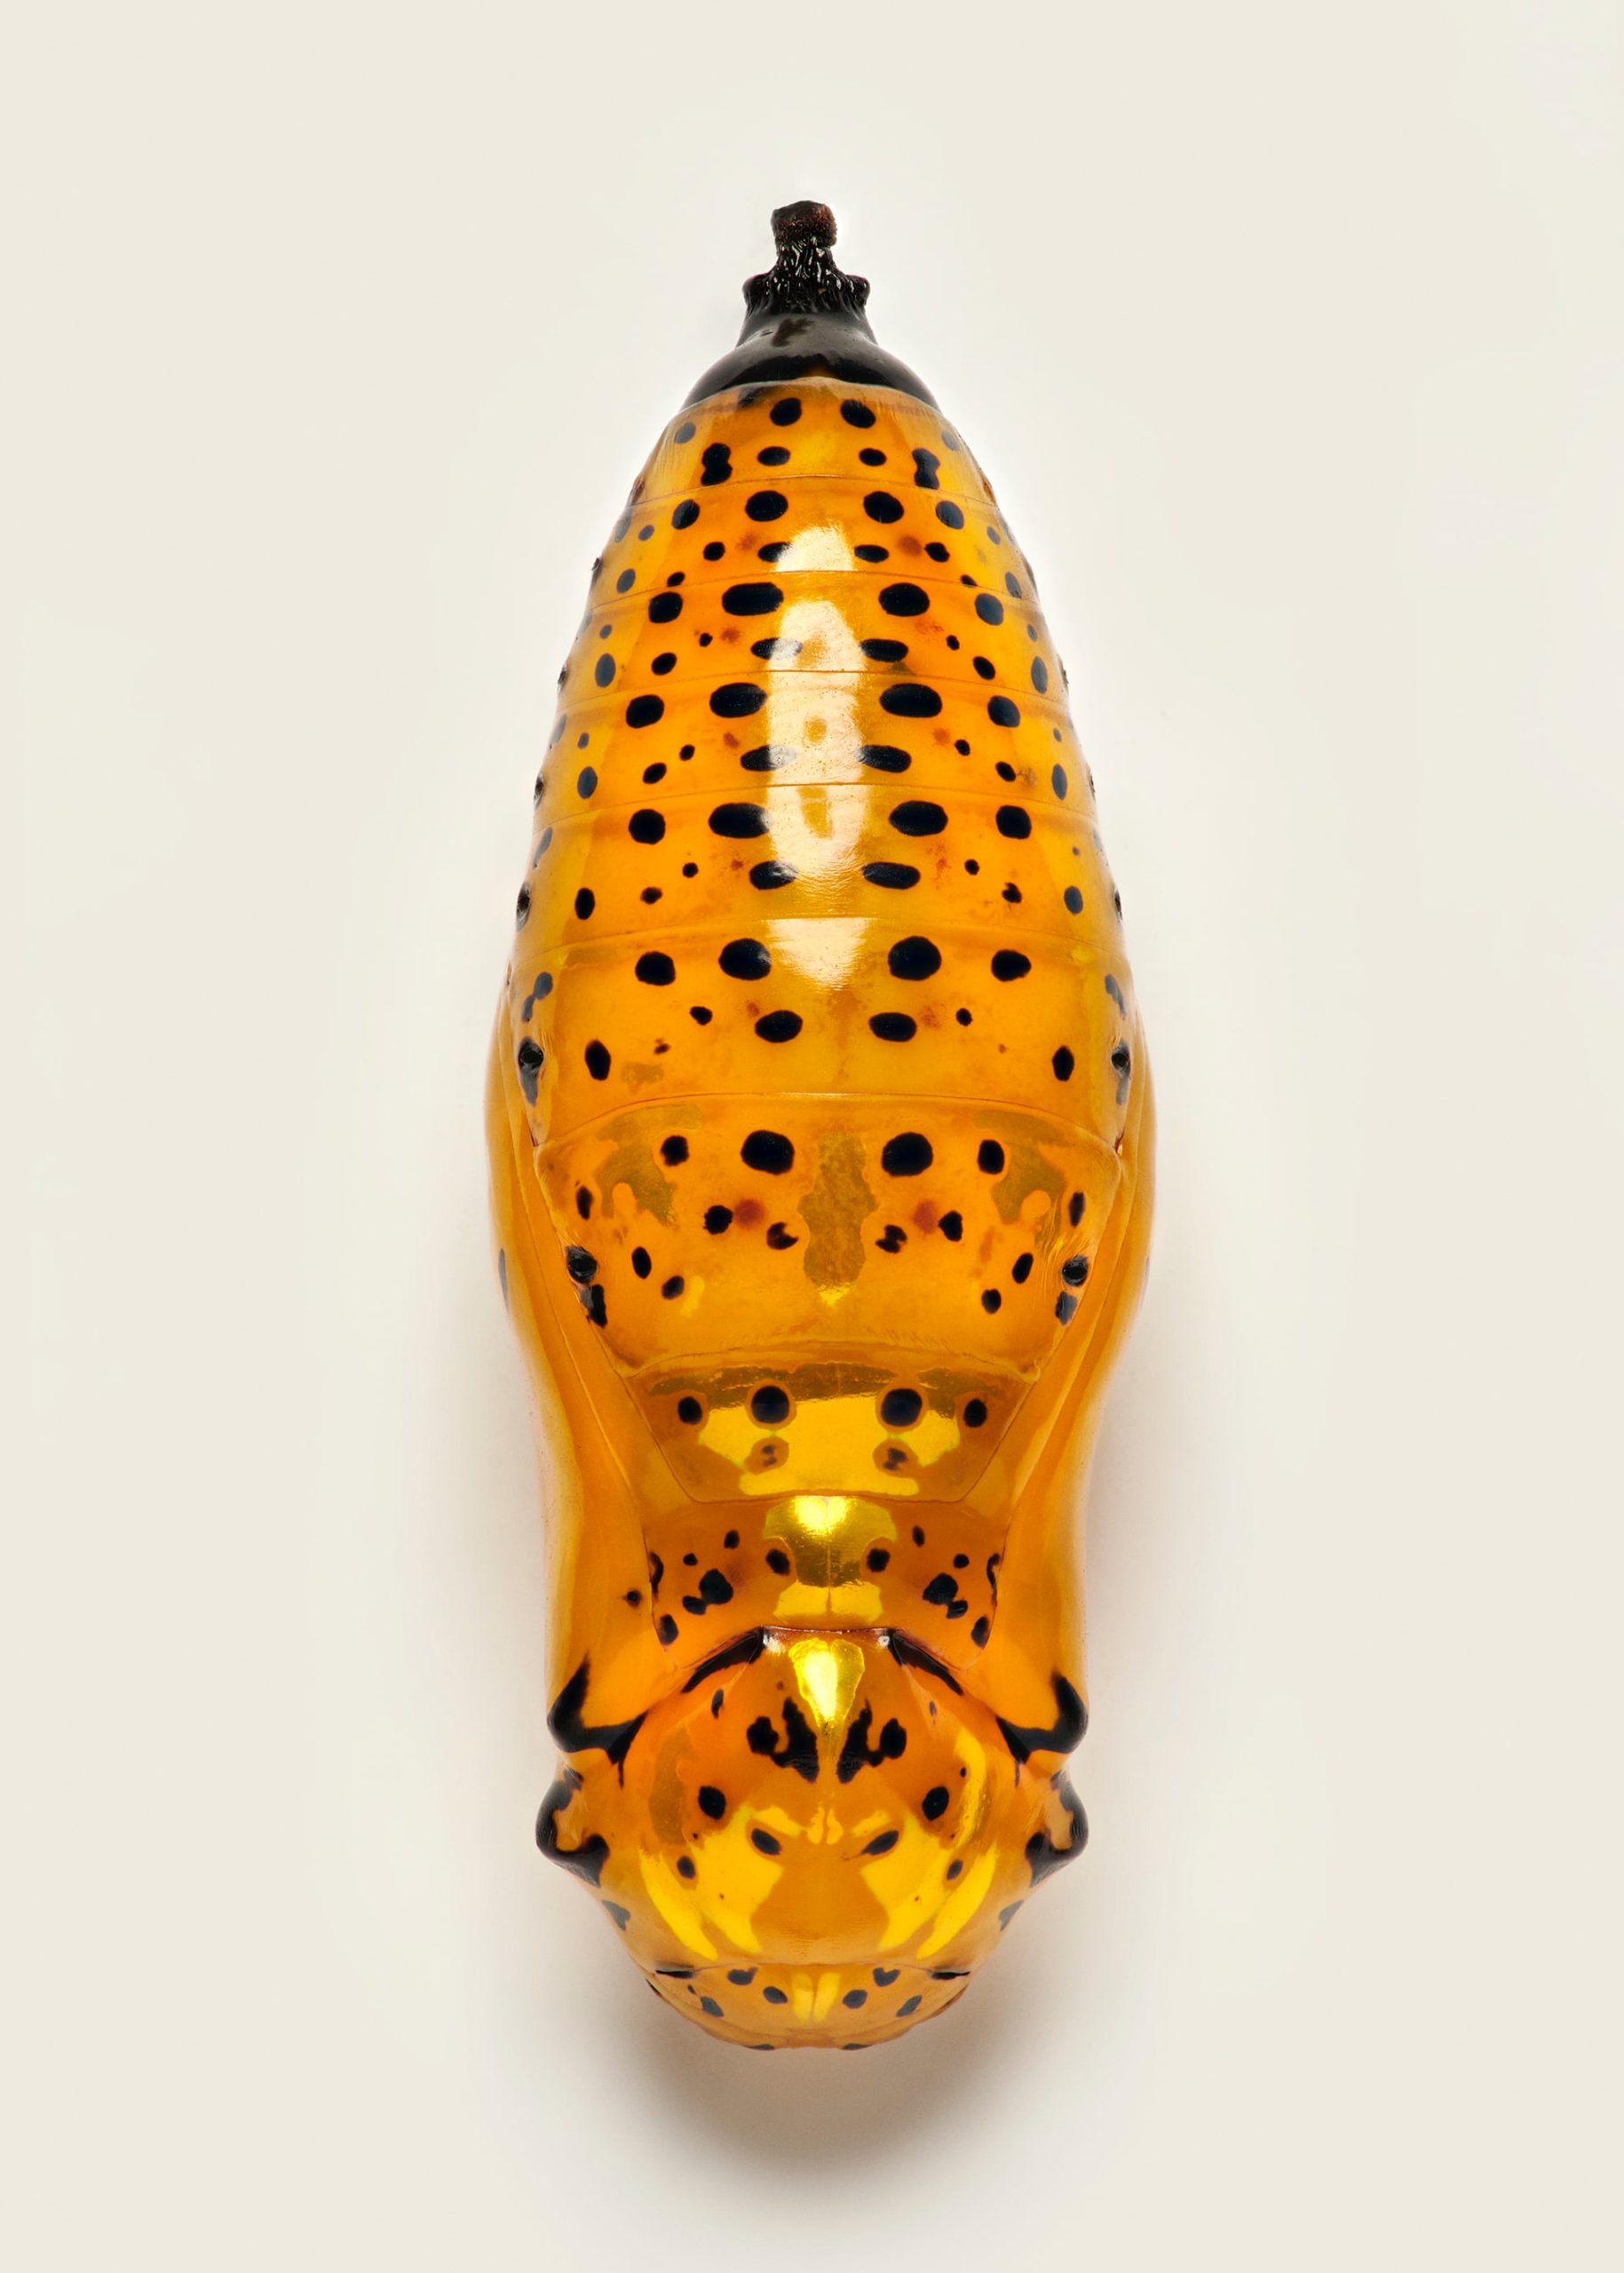 A photo of a butterfly pupa with black dots